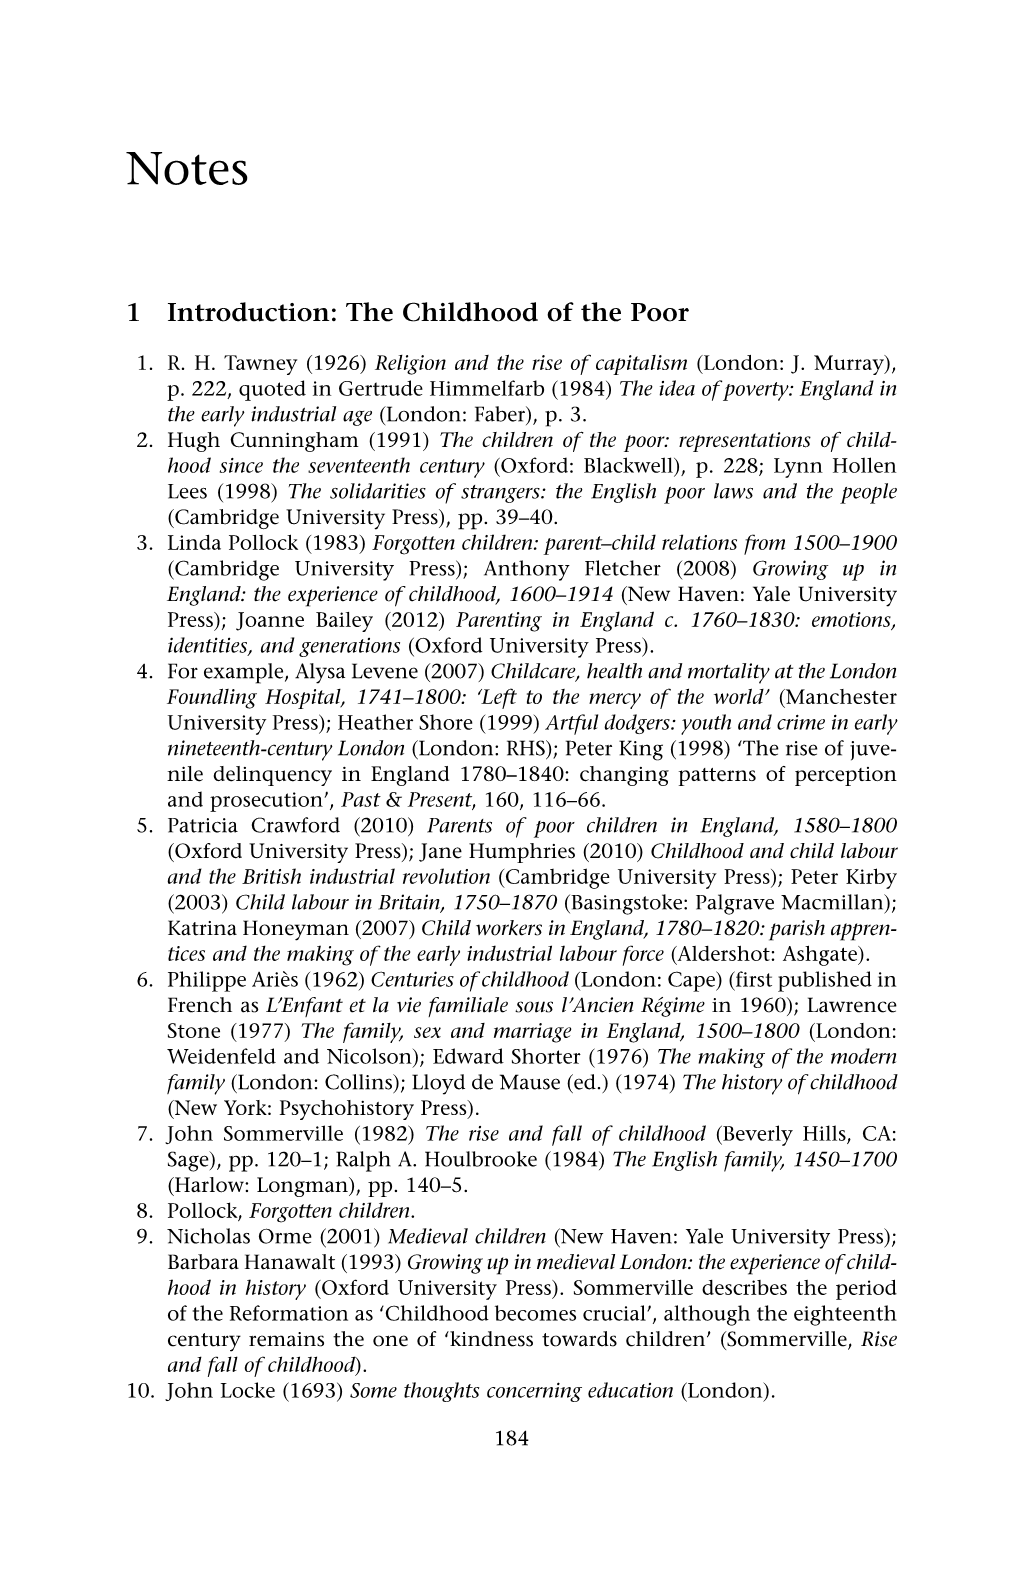 1 Introduction: the Childhood of the Poor